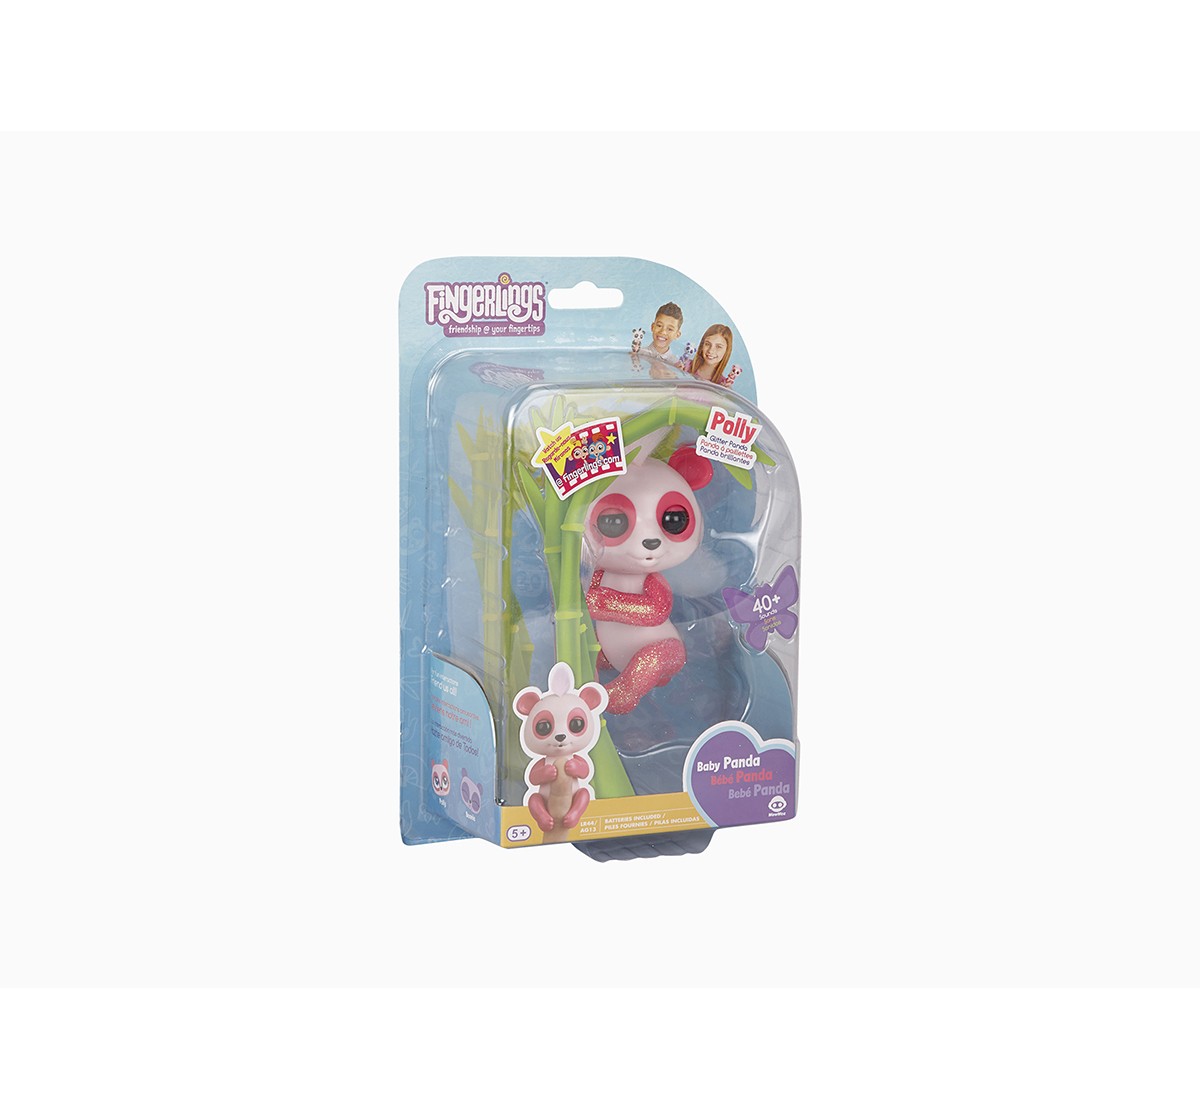 Fingerlings Baby Panda Polly Robotics for Kids age 4Y+ (Pink)